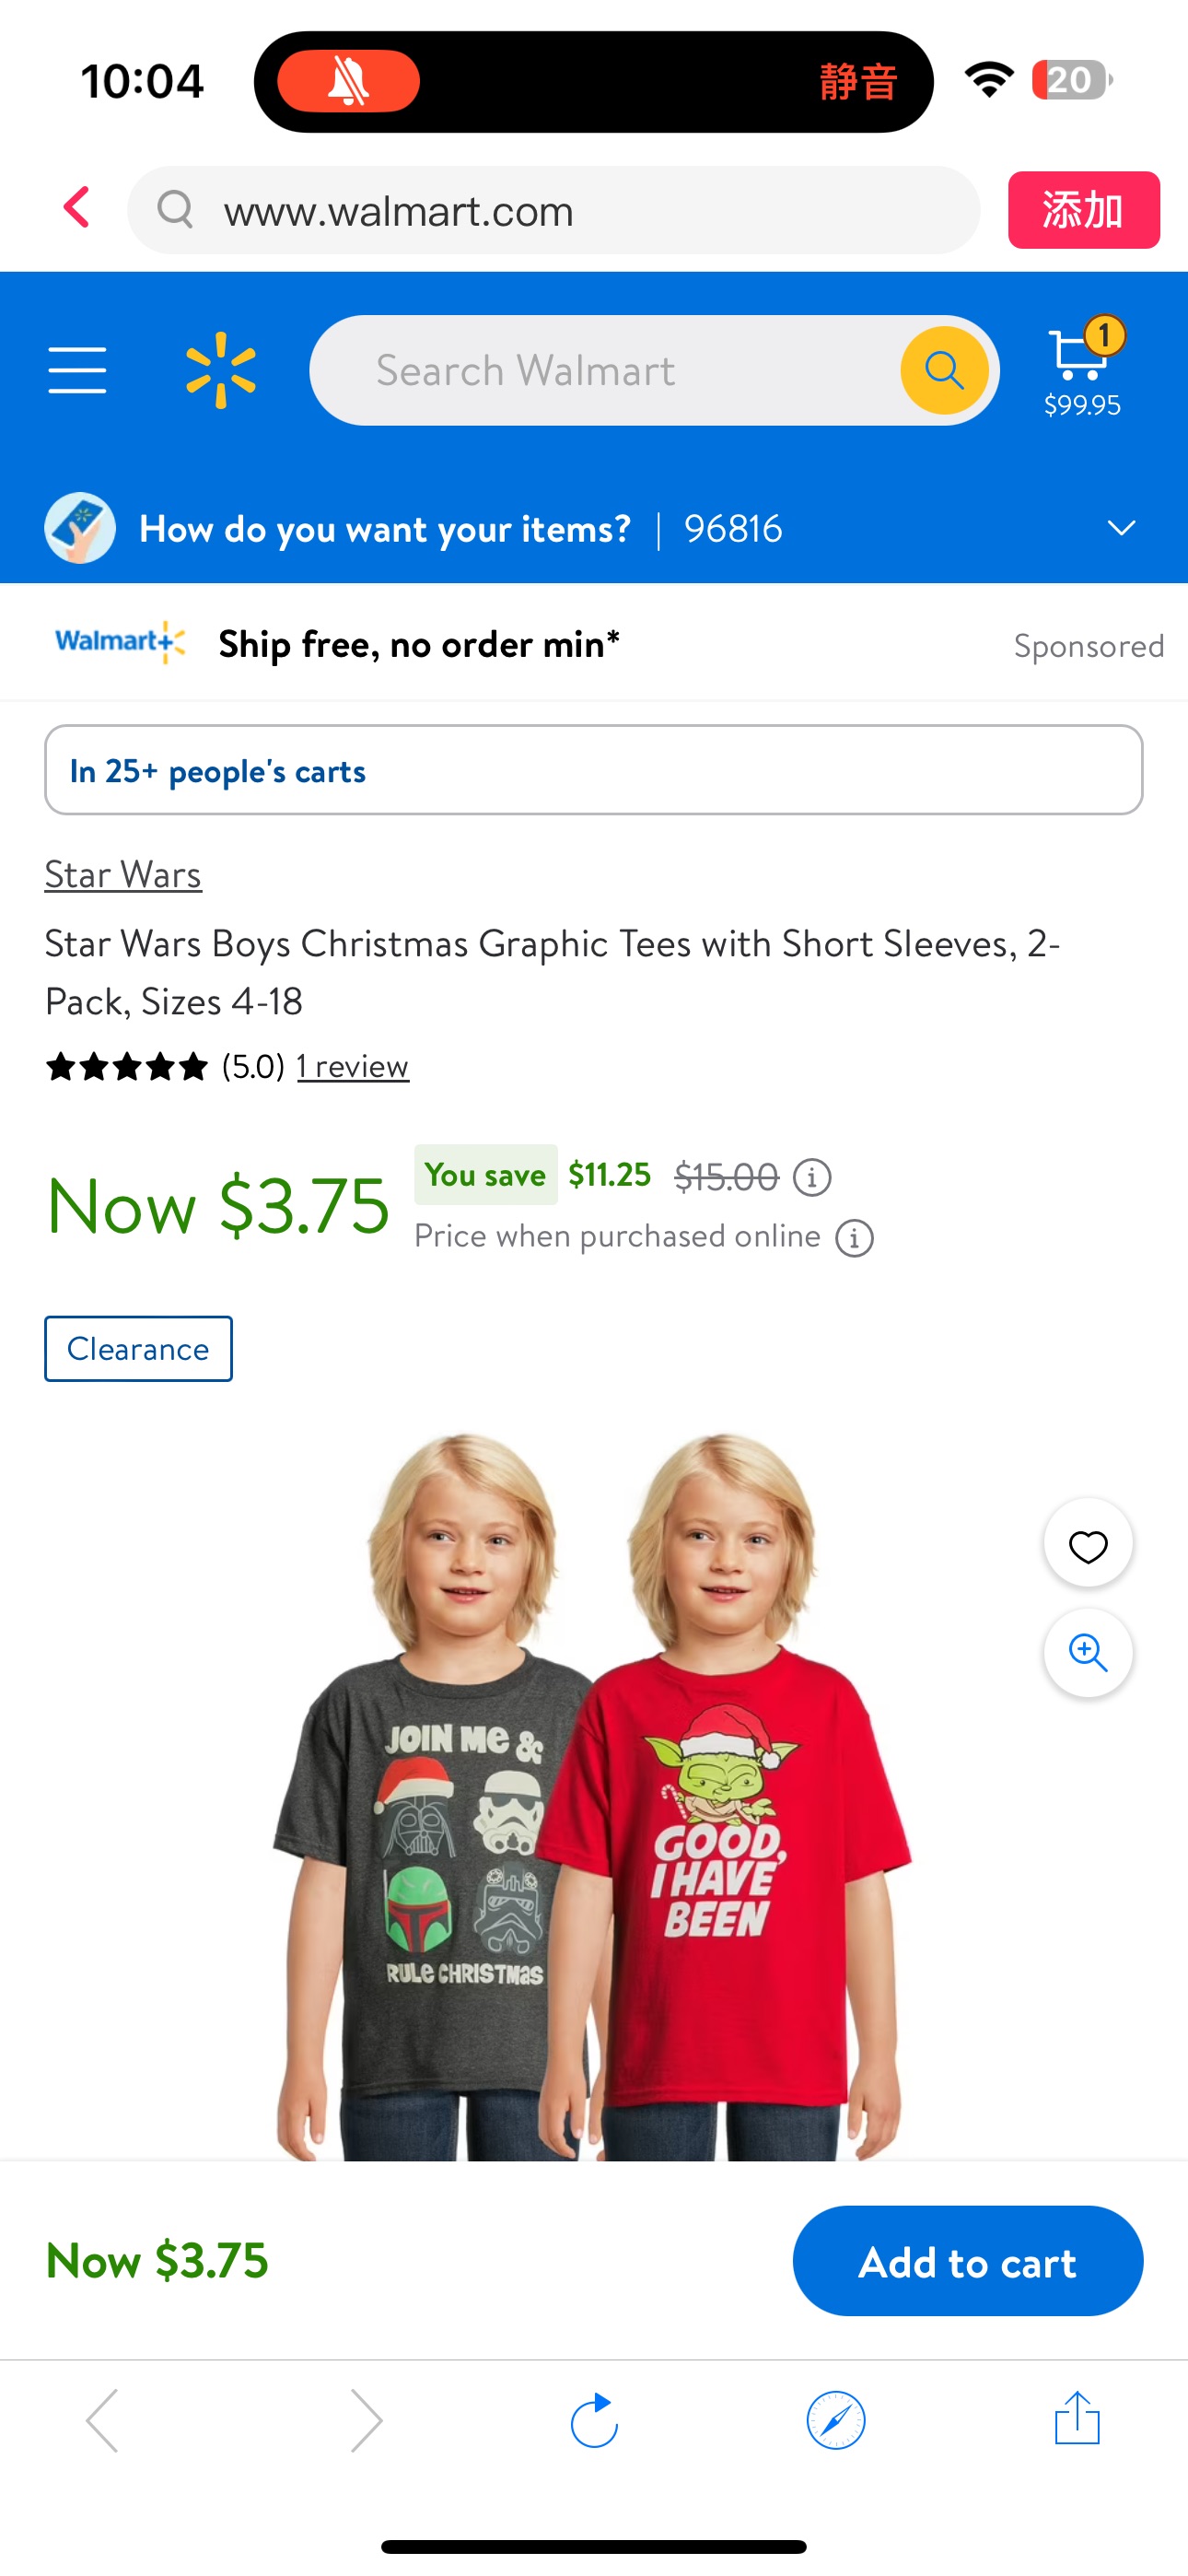 Star Wars Boys Christmas Graphic Tees with Short Sleeves, 2-Pack, Sizes 4-18 - Walmart.com男童T恤两件